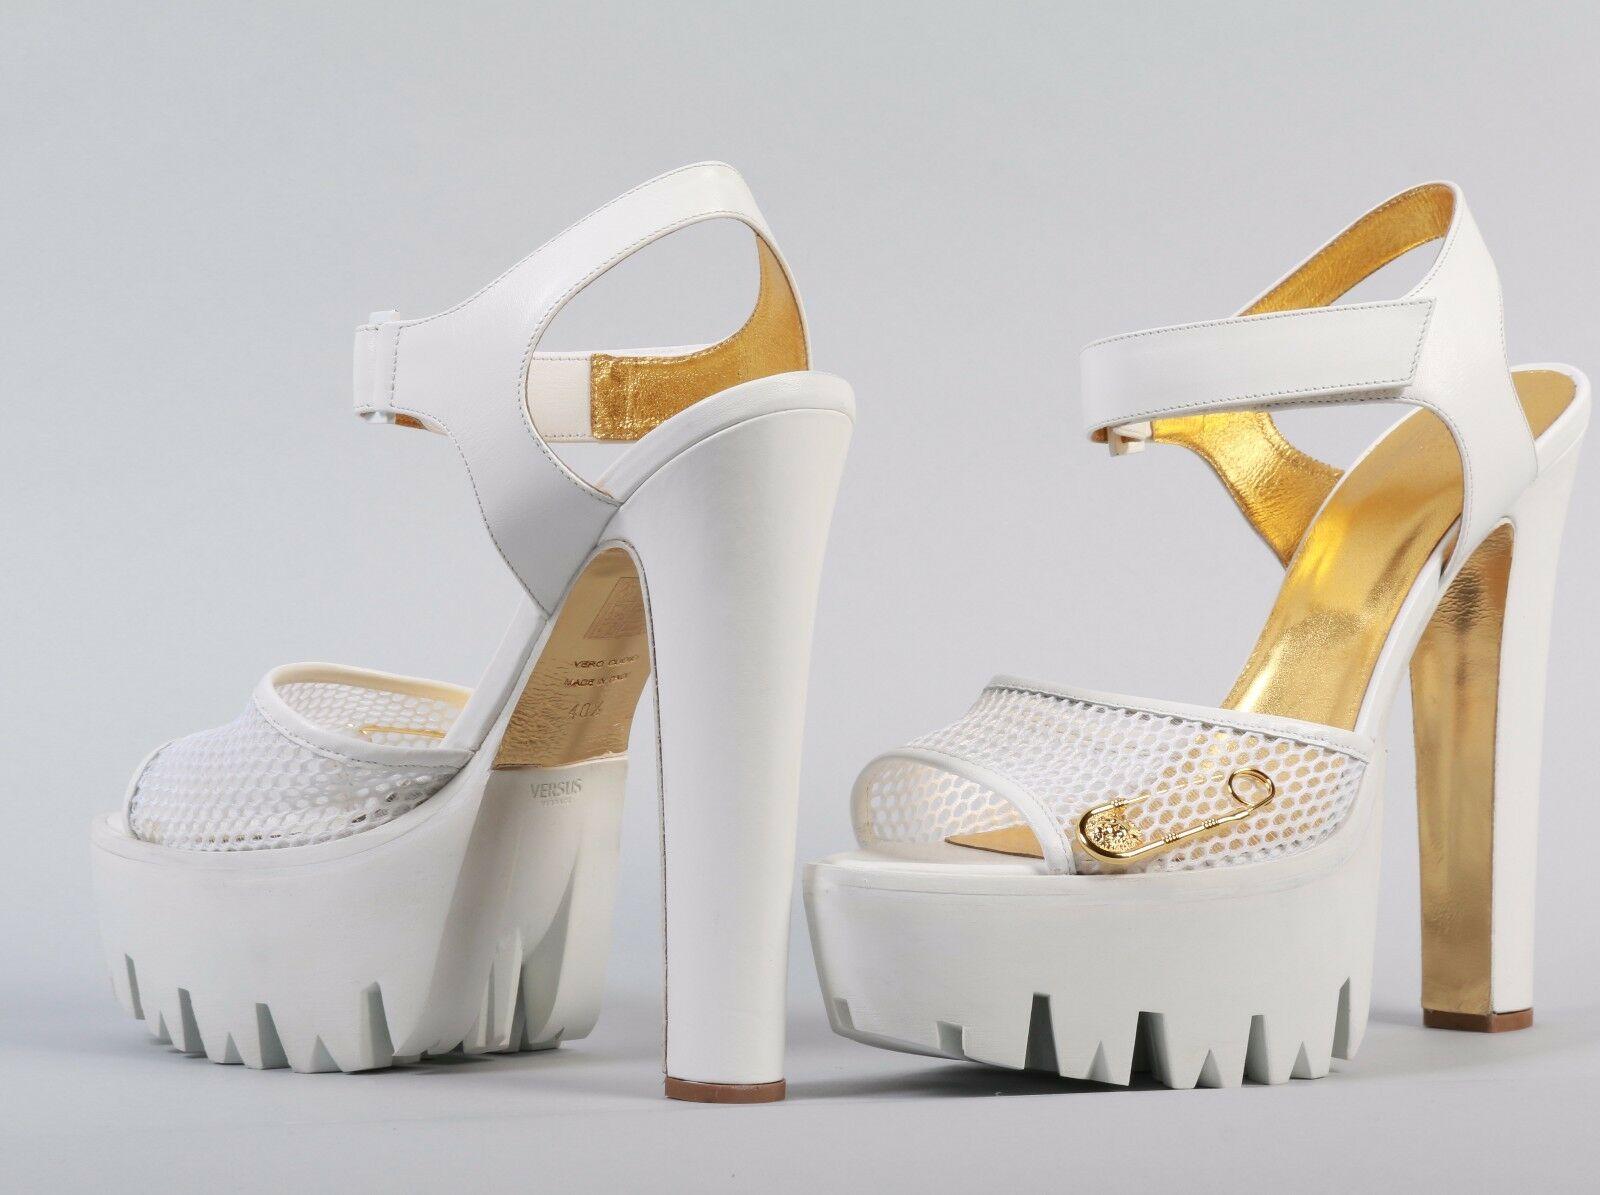 Women's New Versace Versus + Anthony Vaccarello White Platform Sandals 40.5 - 10.5 For Sale